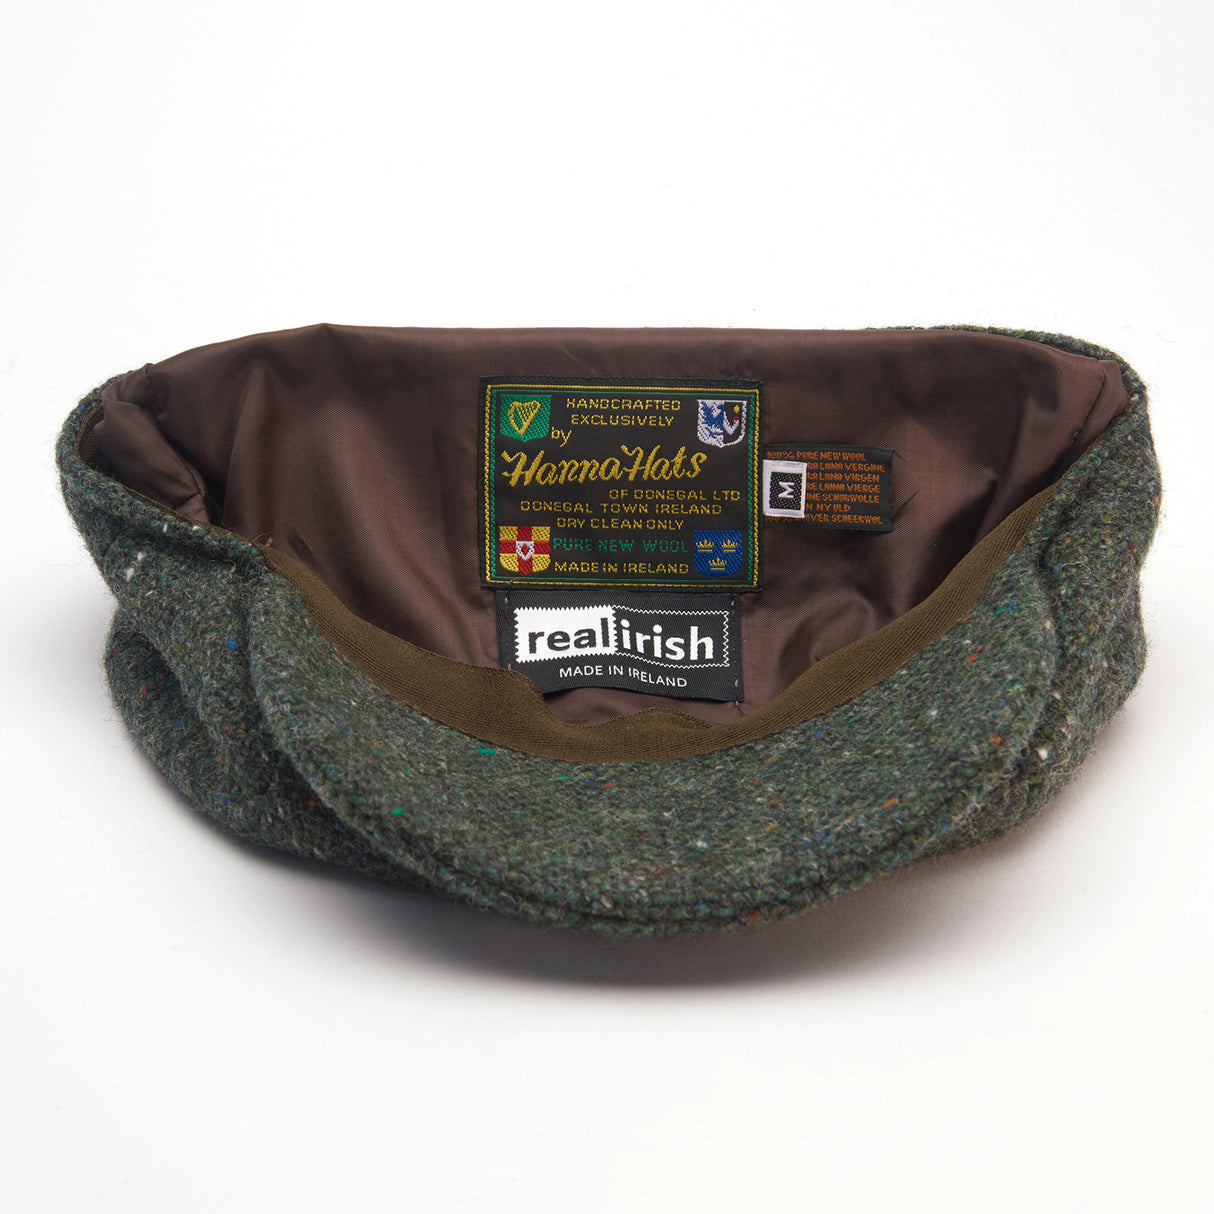 Inside View of a Hanna Hat Showing Sewn In  Labels Including a Real Irish Label